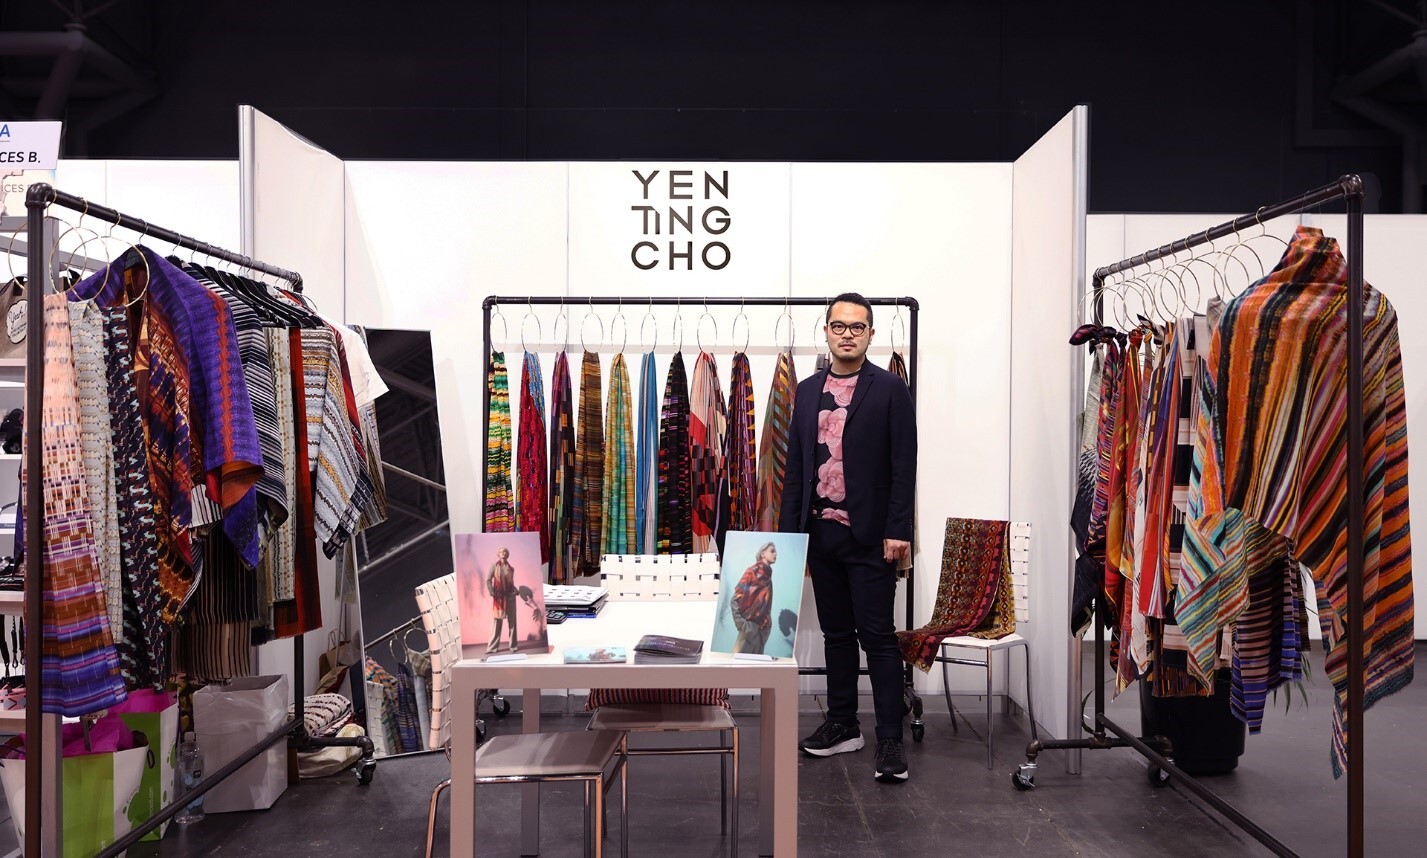 Yen Ting Cho debuted in Coterie New York, North America’s premier trade event for the advanced contemporary women's fashion boutique